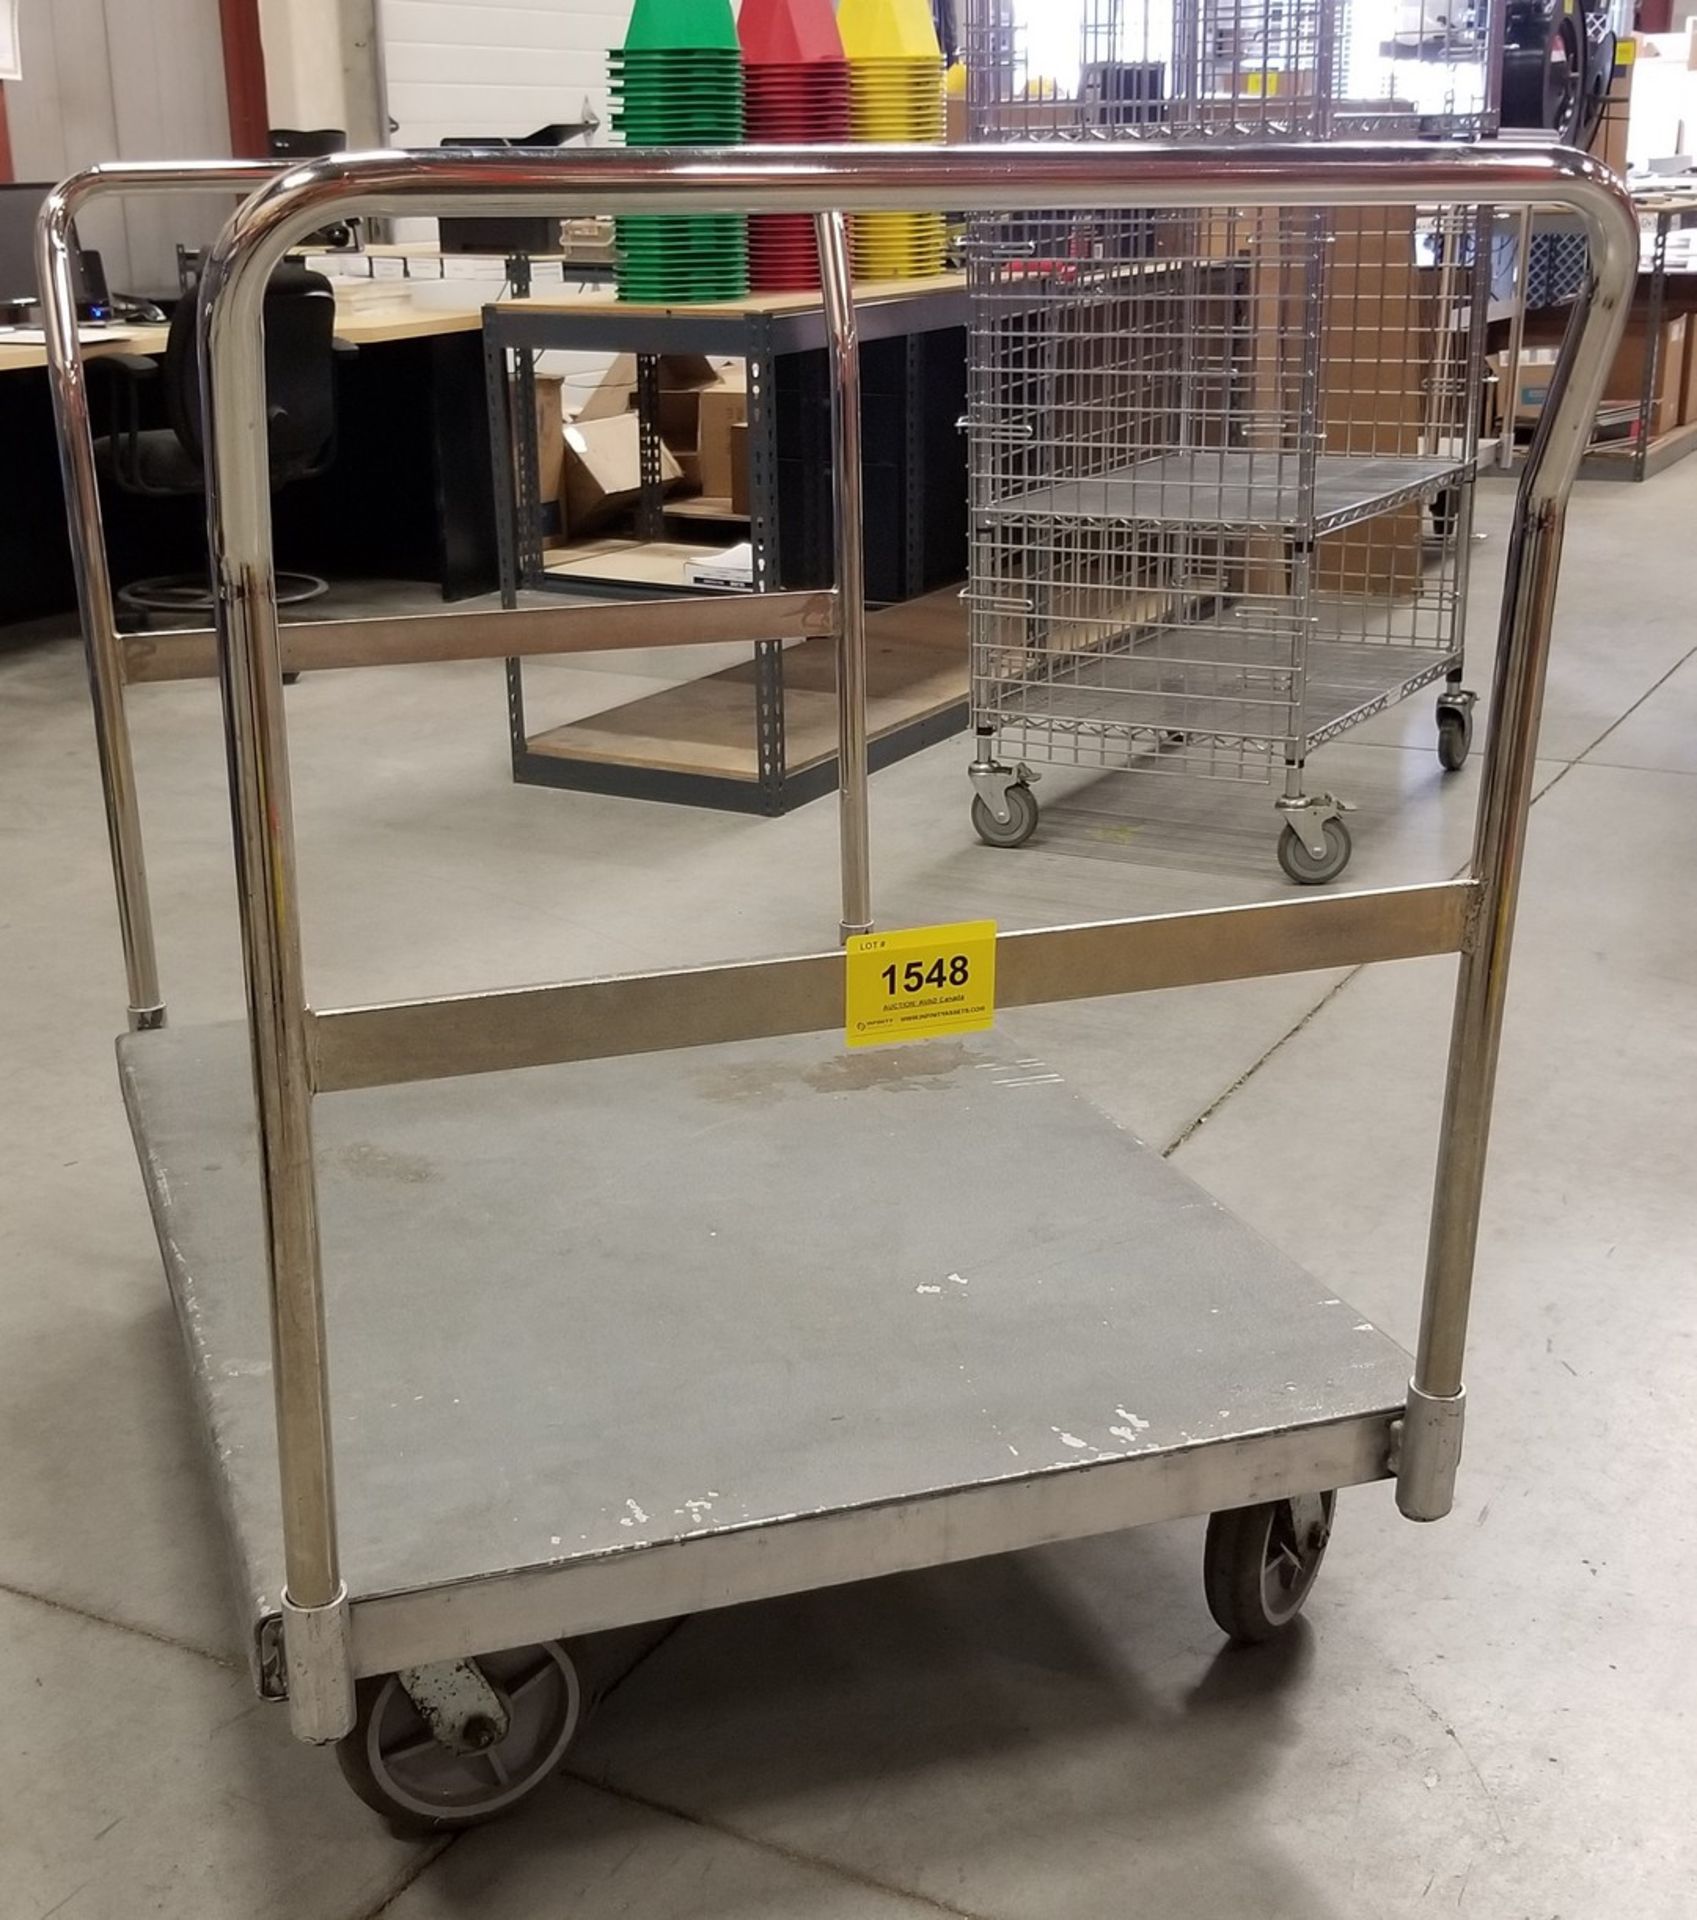 METAL WAREHOUSE CART - DELAYED DELIVERY AFTER JUNE 25